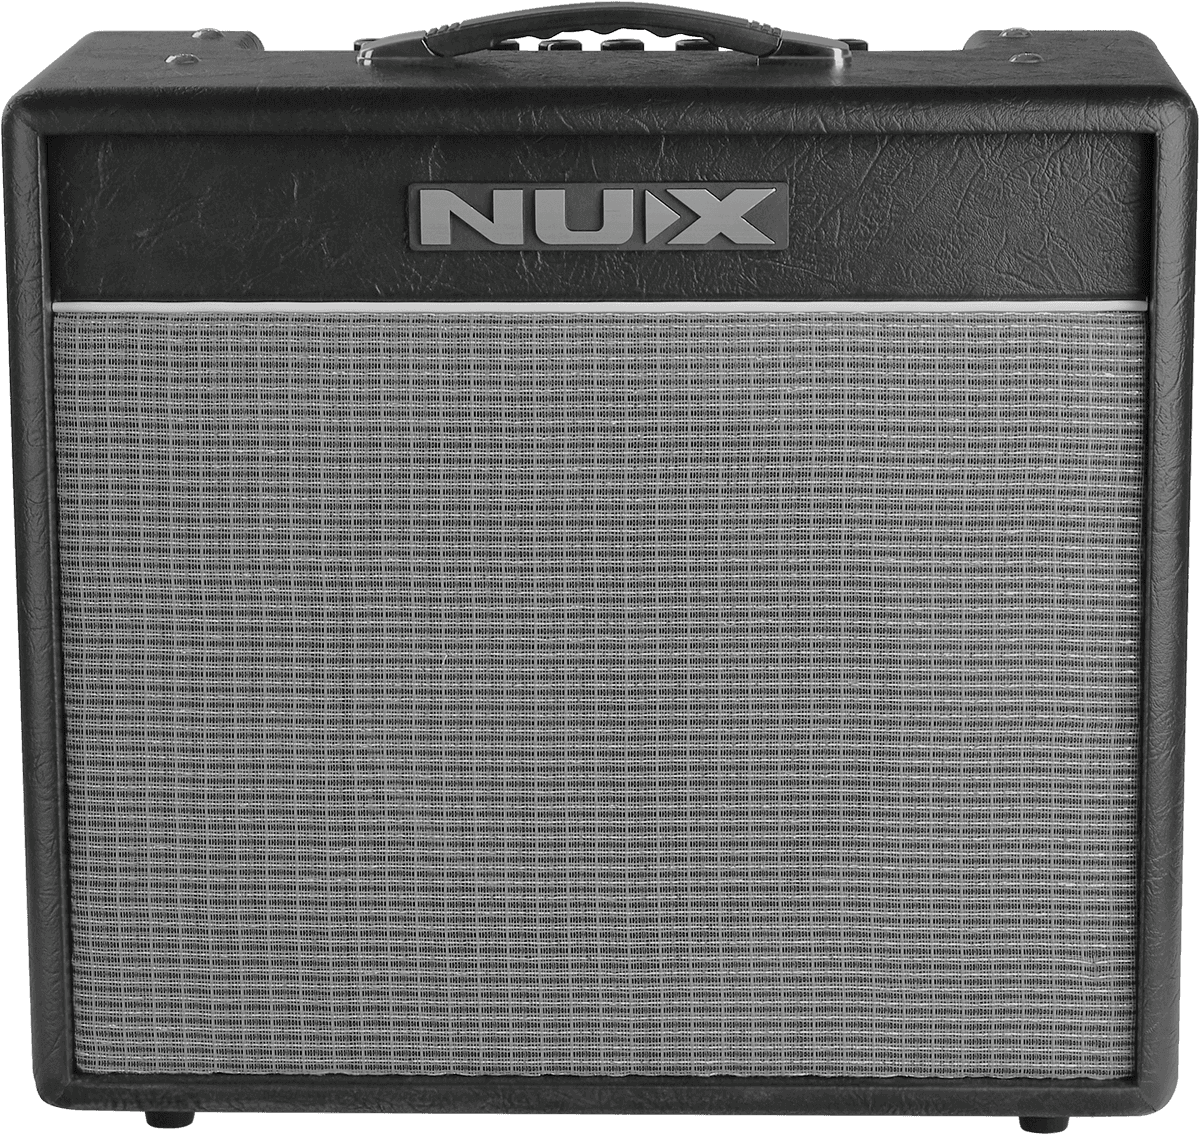 Nux Mighty 40 Bt 40w 1x10 - Electric guitar combo amp - Variation 1